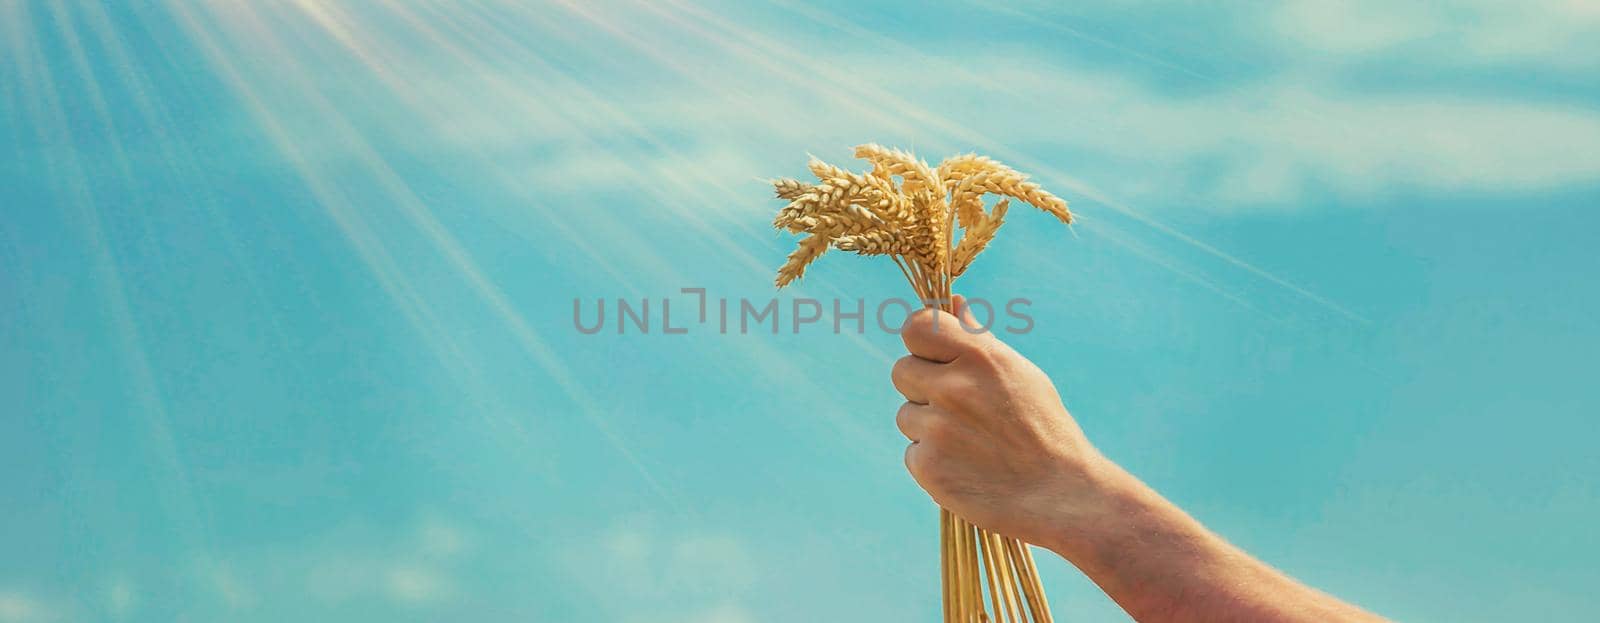 A man with spikelets of wheat in his hands. Selective focus. nature.